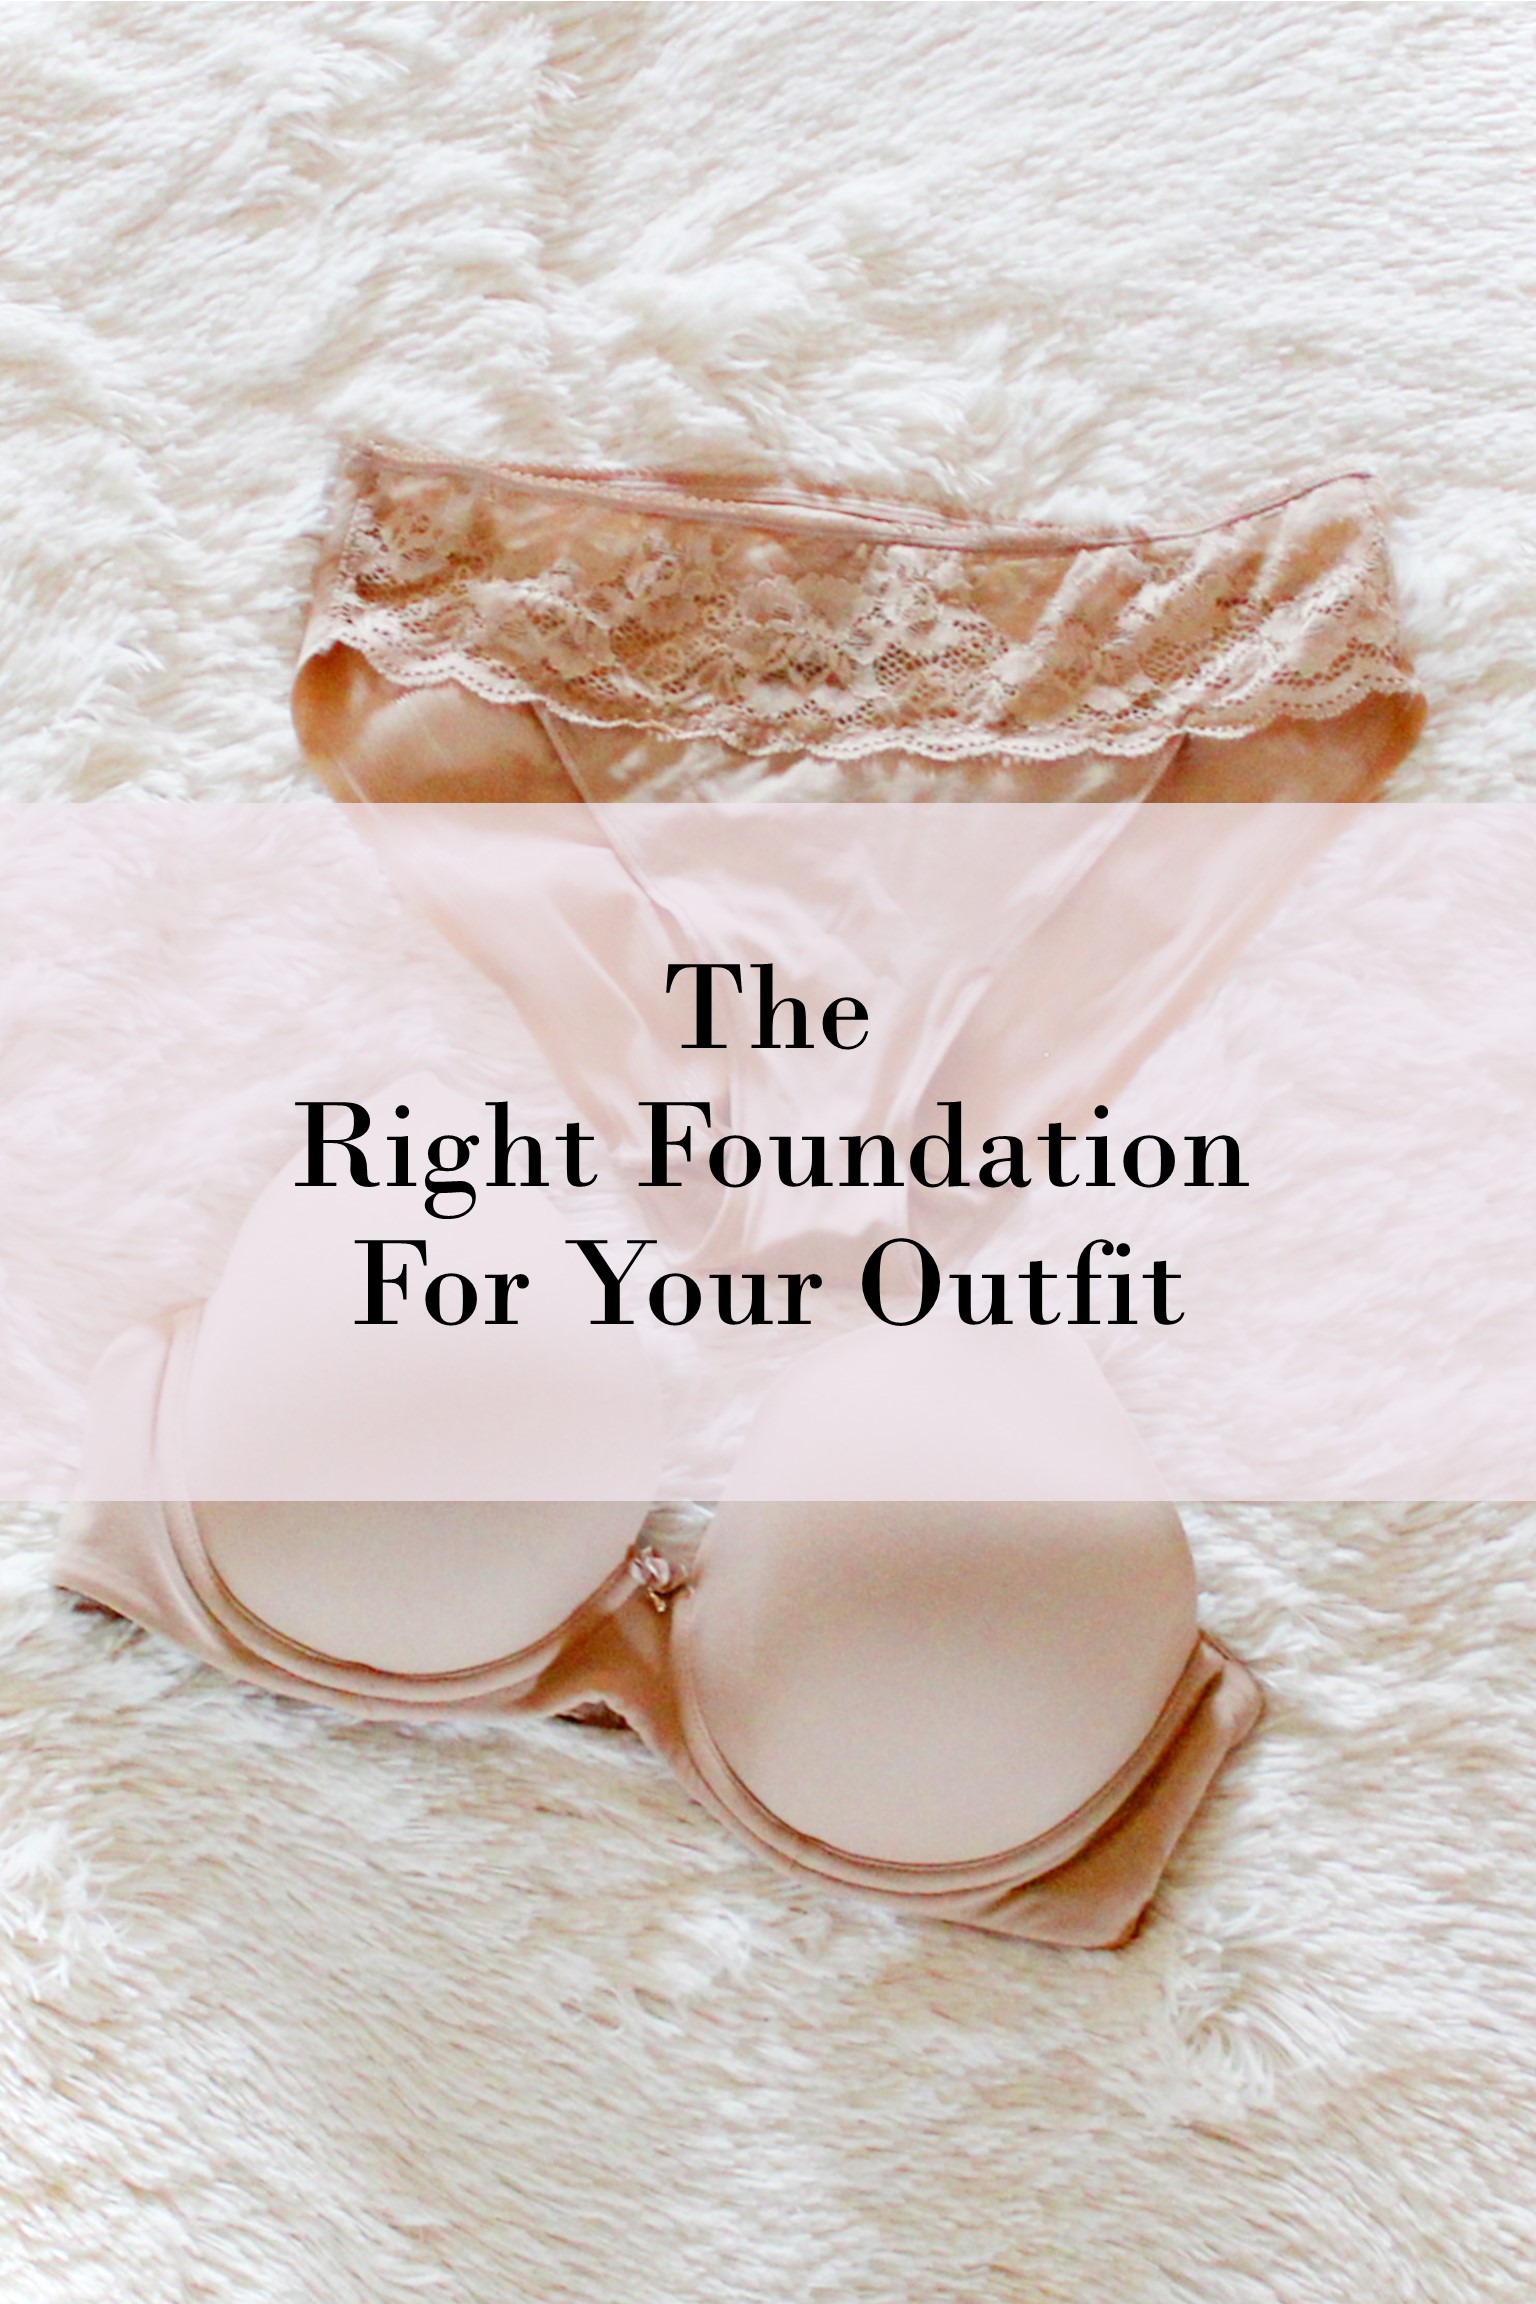 The Right Foundation for Your Outfit